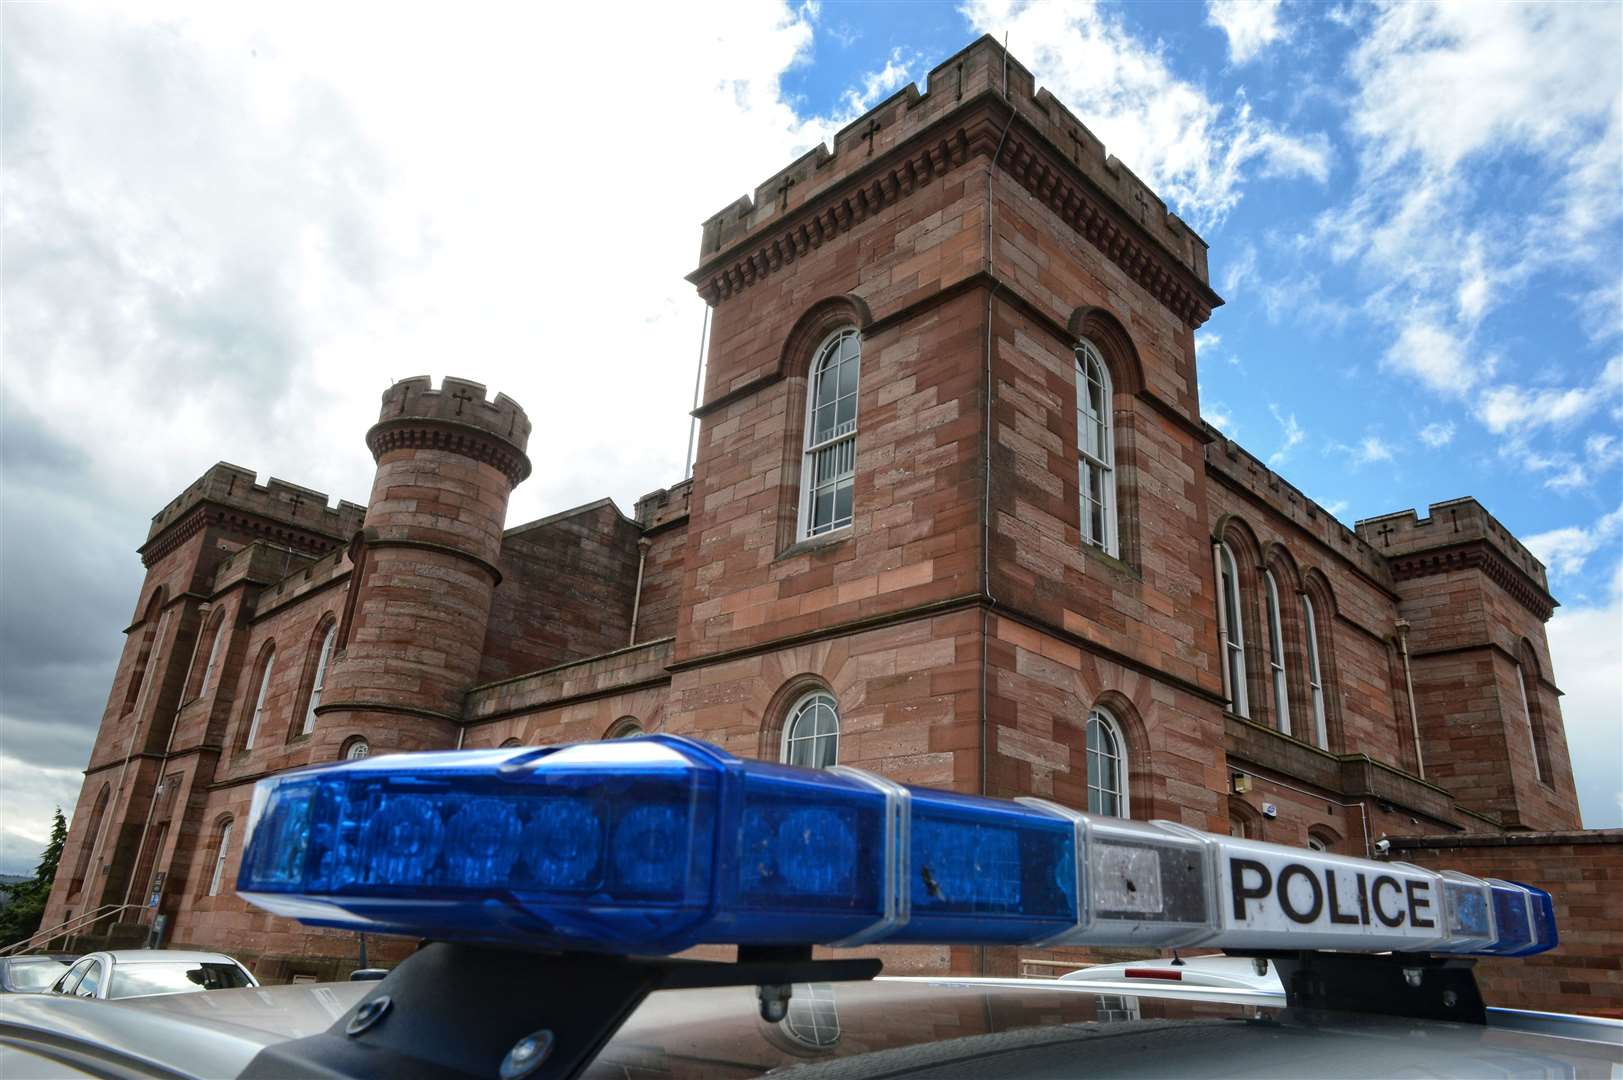 The jury trial was held at Inverness Sheriff Court